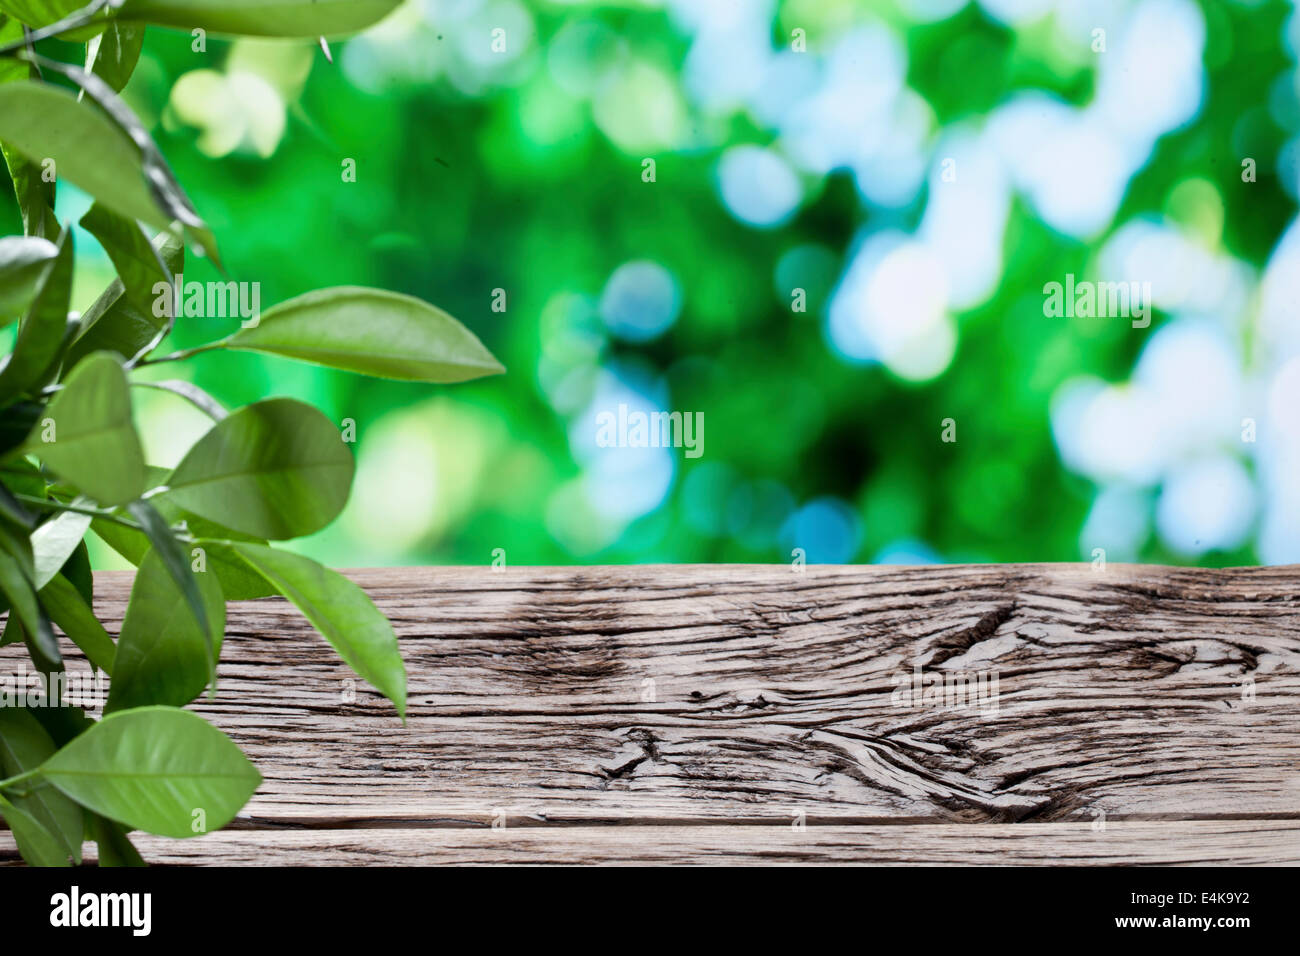 Old wooden table with green foliage background. Stock Photo